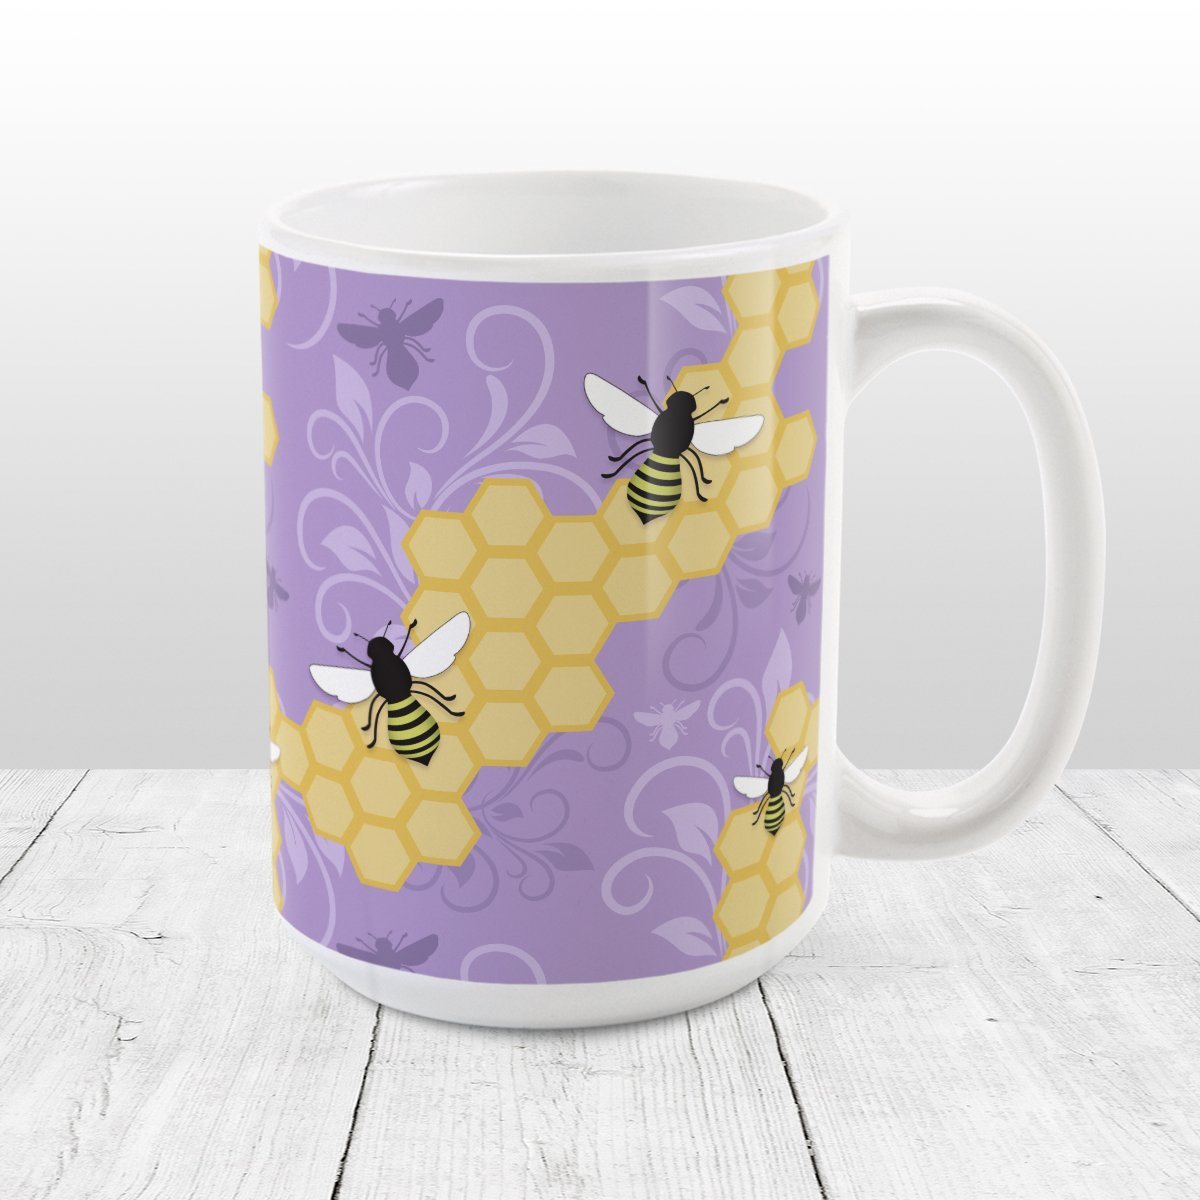 Purple Honeycomb Bee Mug at Amy's Coffee Mugs. A ceramic coffee mug designed with a pattern of black and yellow bees on honeycomb lines over a purple flourish background that wraps around the mug to the handle.